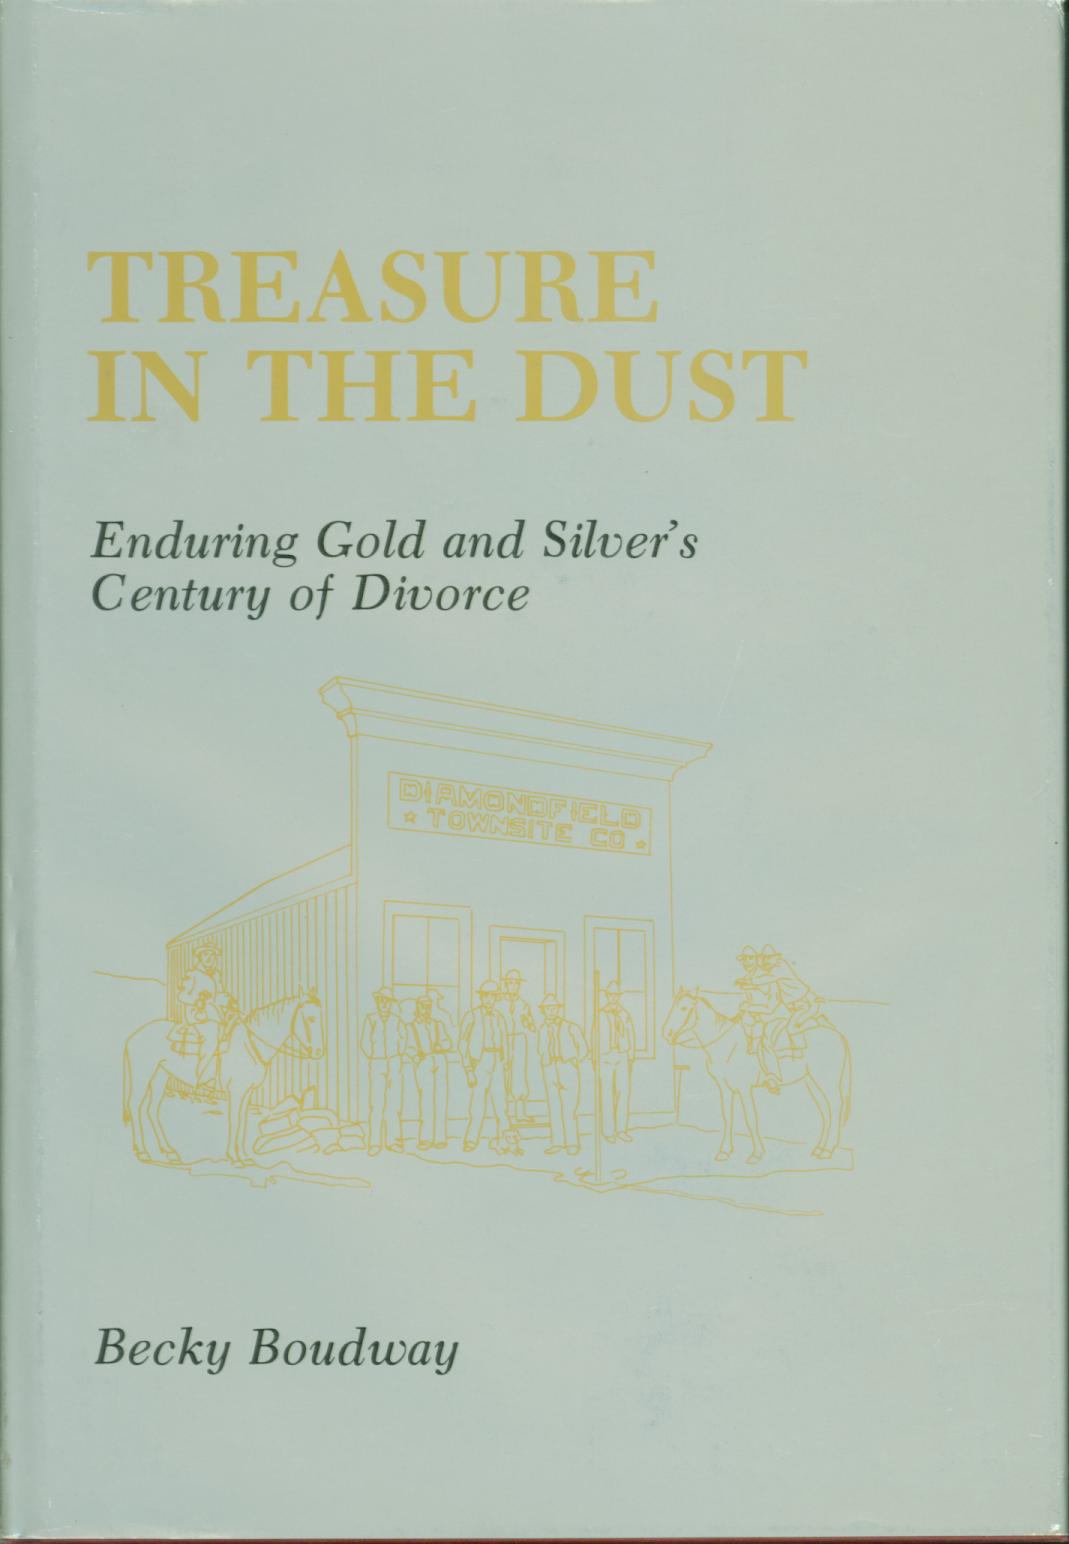 TREASURE IN THE DUST: enduring gold and silver's century of divorce.